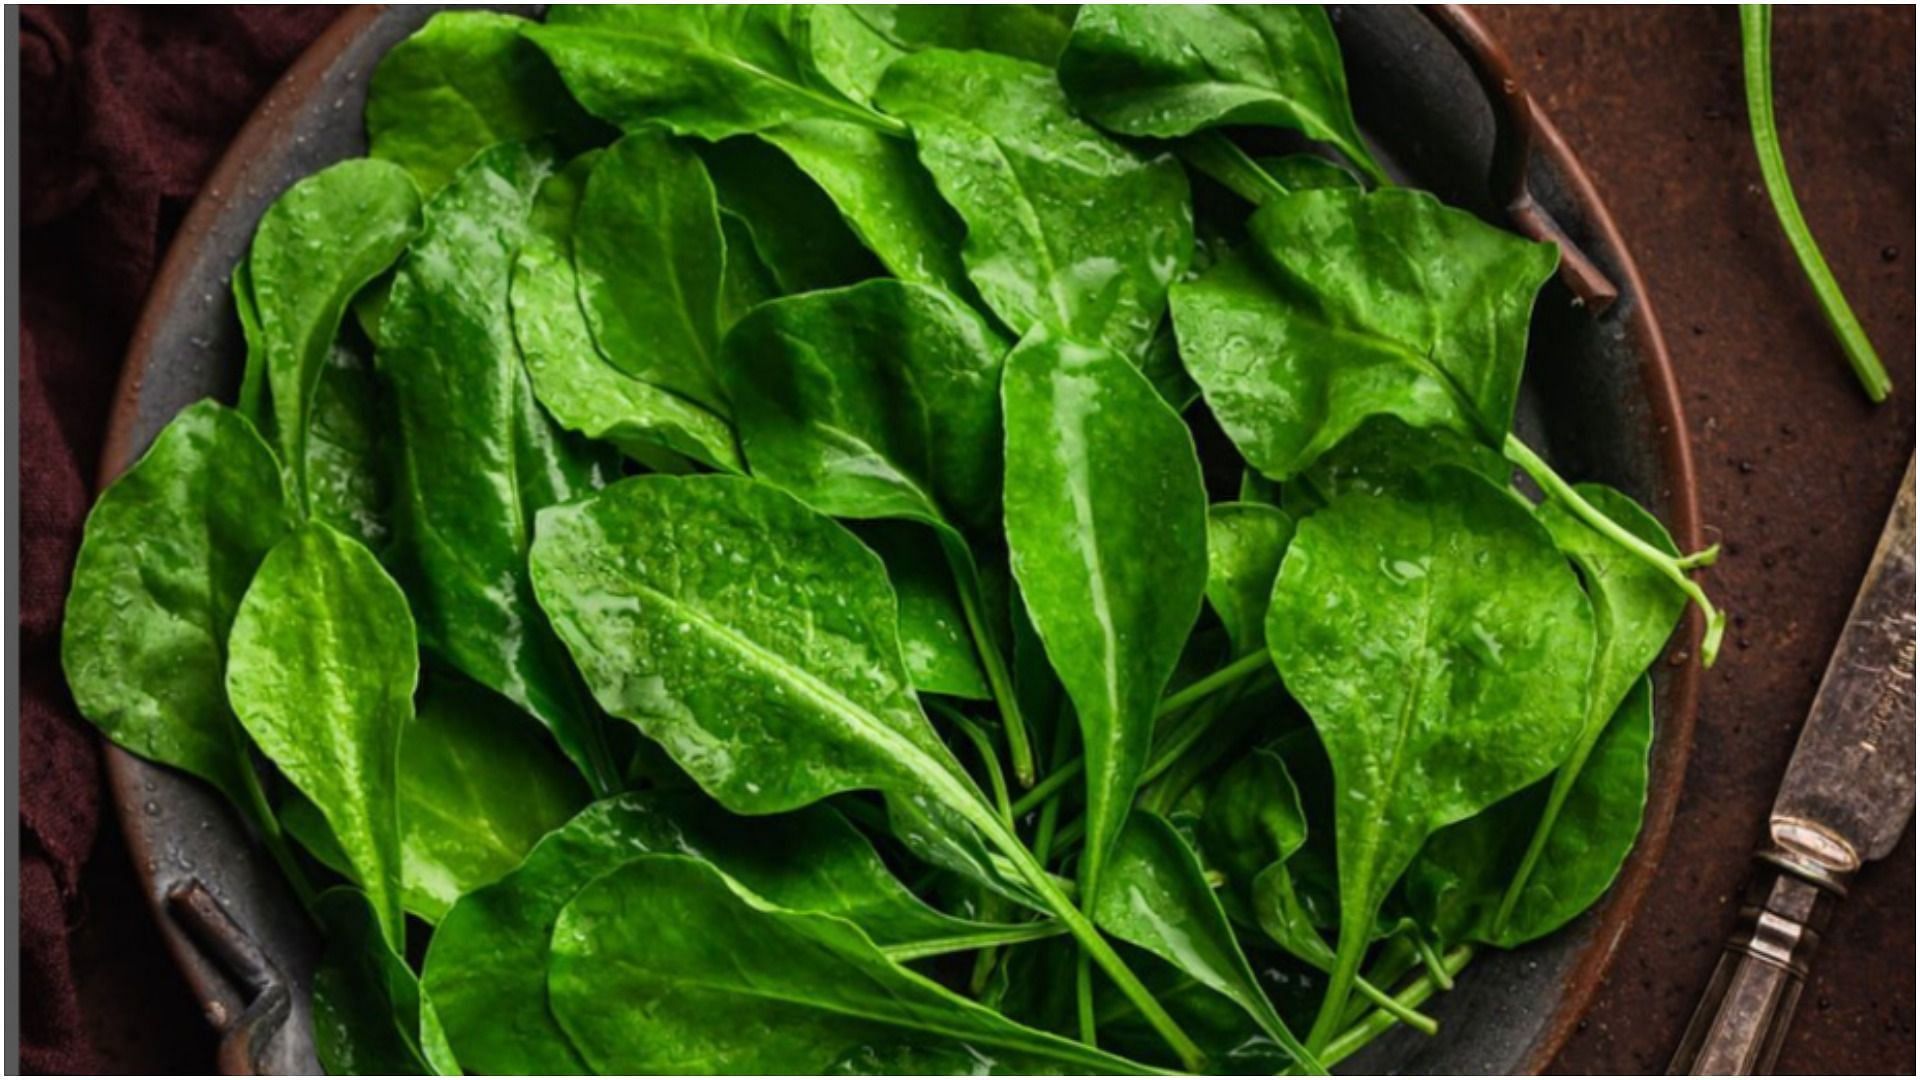 Coles has recalled its baby spinach packages recently due to possible salmonella contamination. (Image via pixel_please/Instagram)